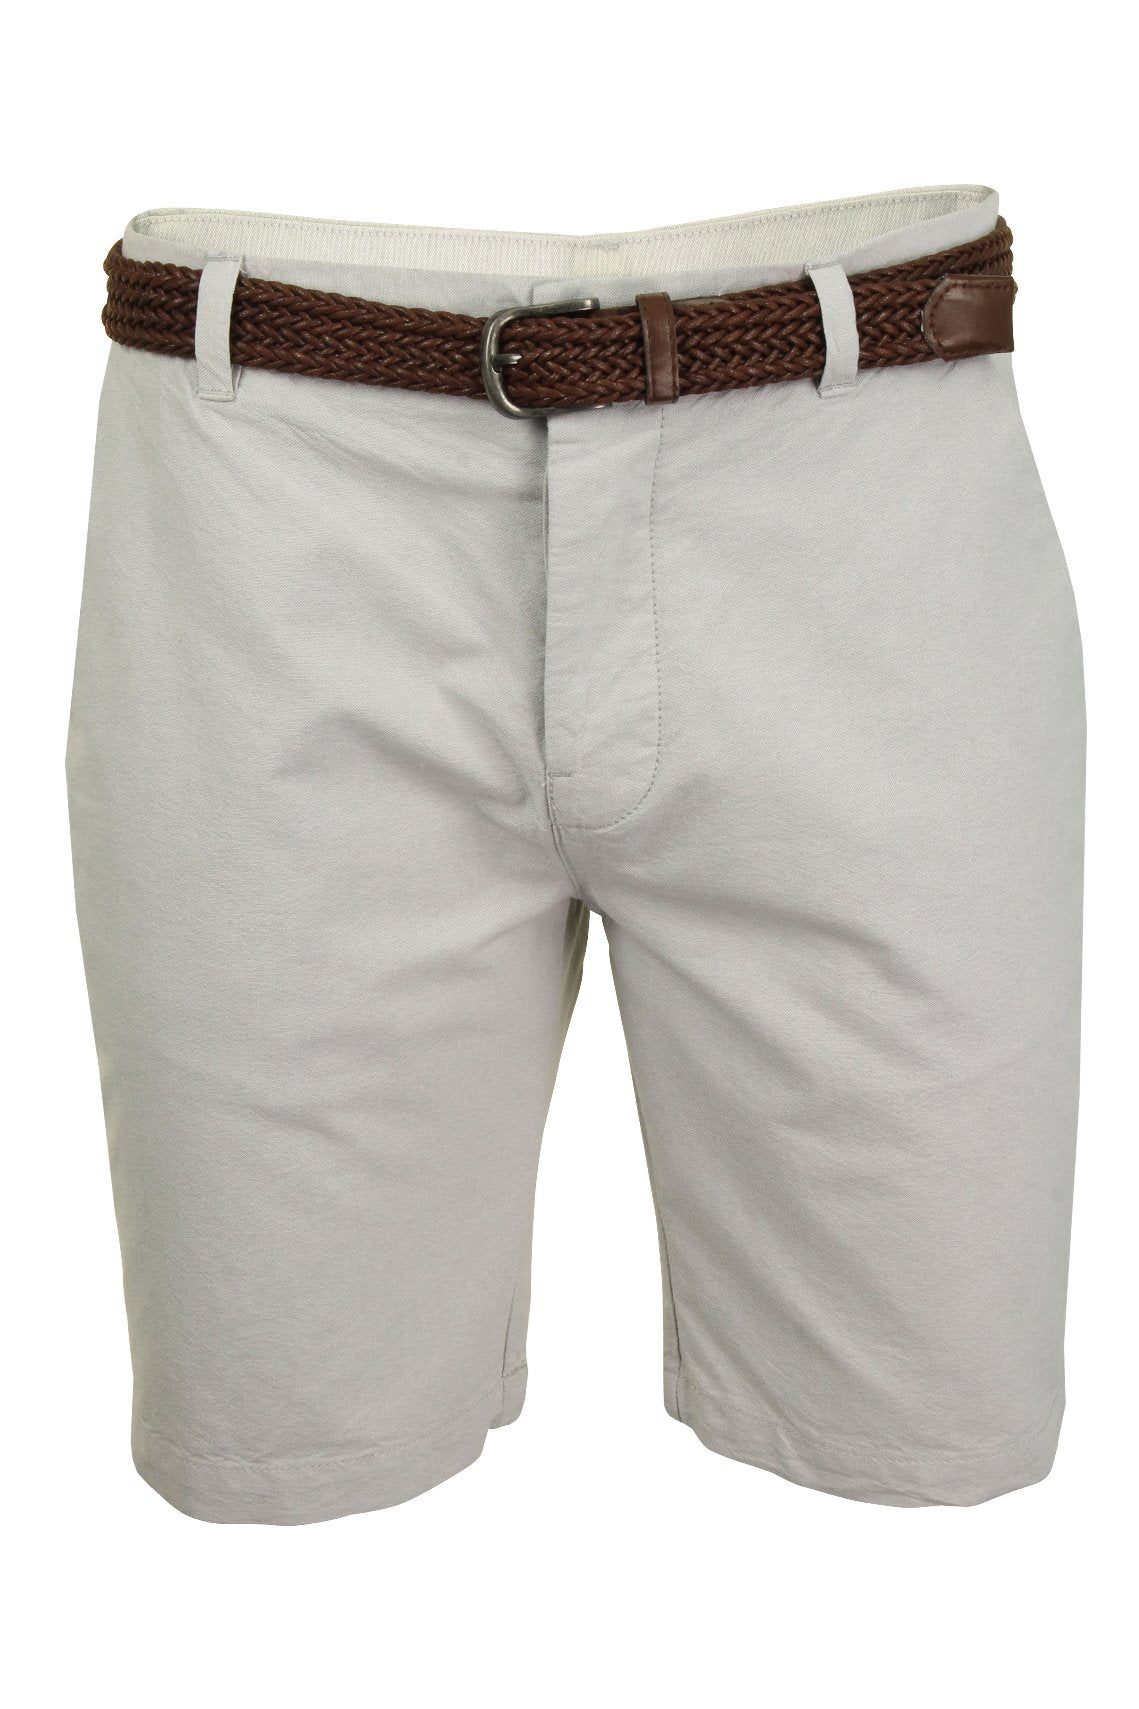 Xact Mens Oxford Chino Shorts with Belt, 01, Xsrt1029, Oxford Ice (Brown Belt)